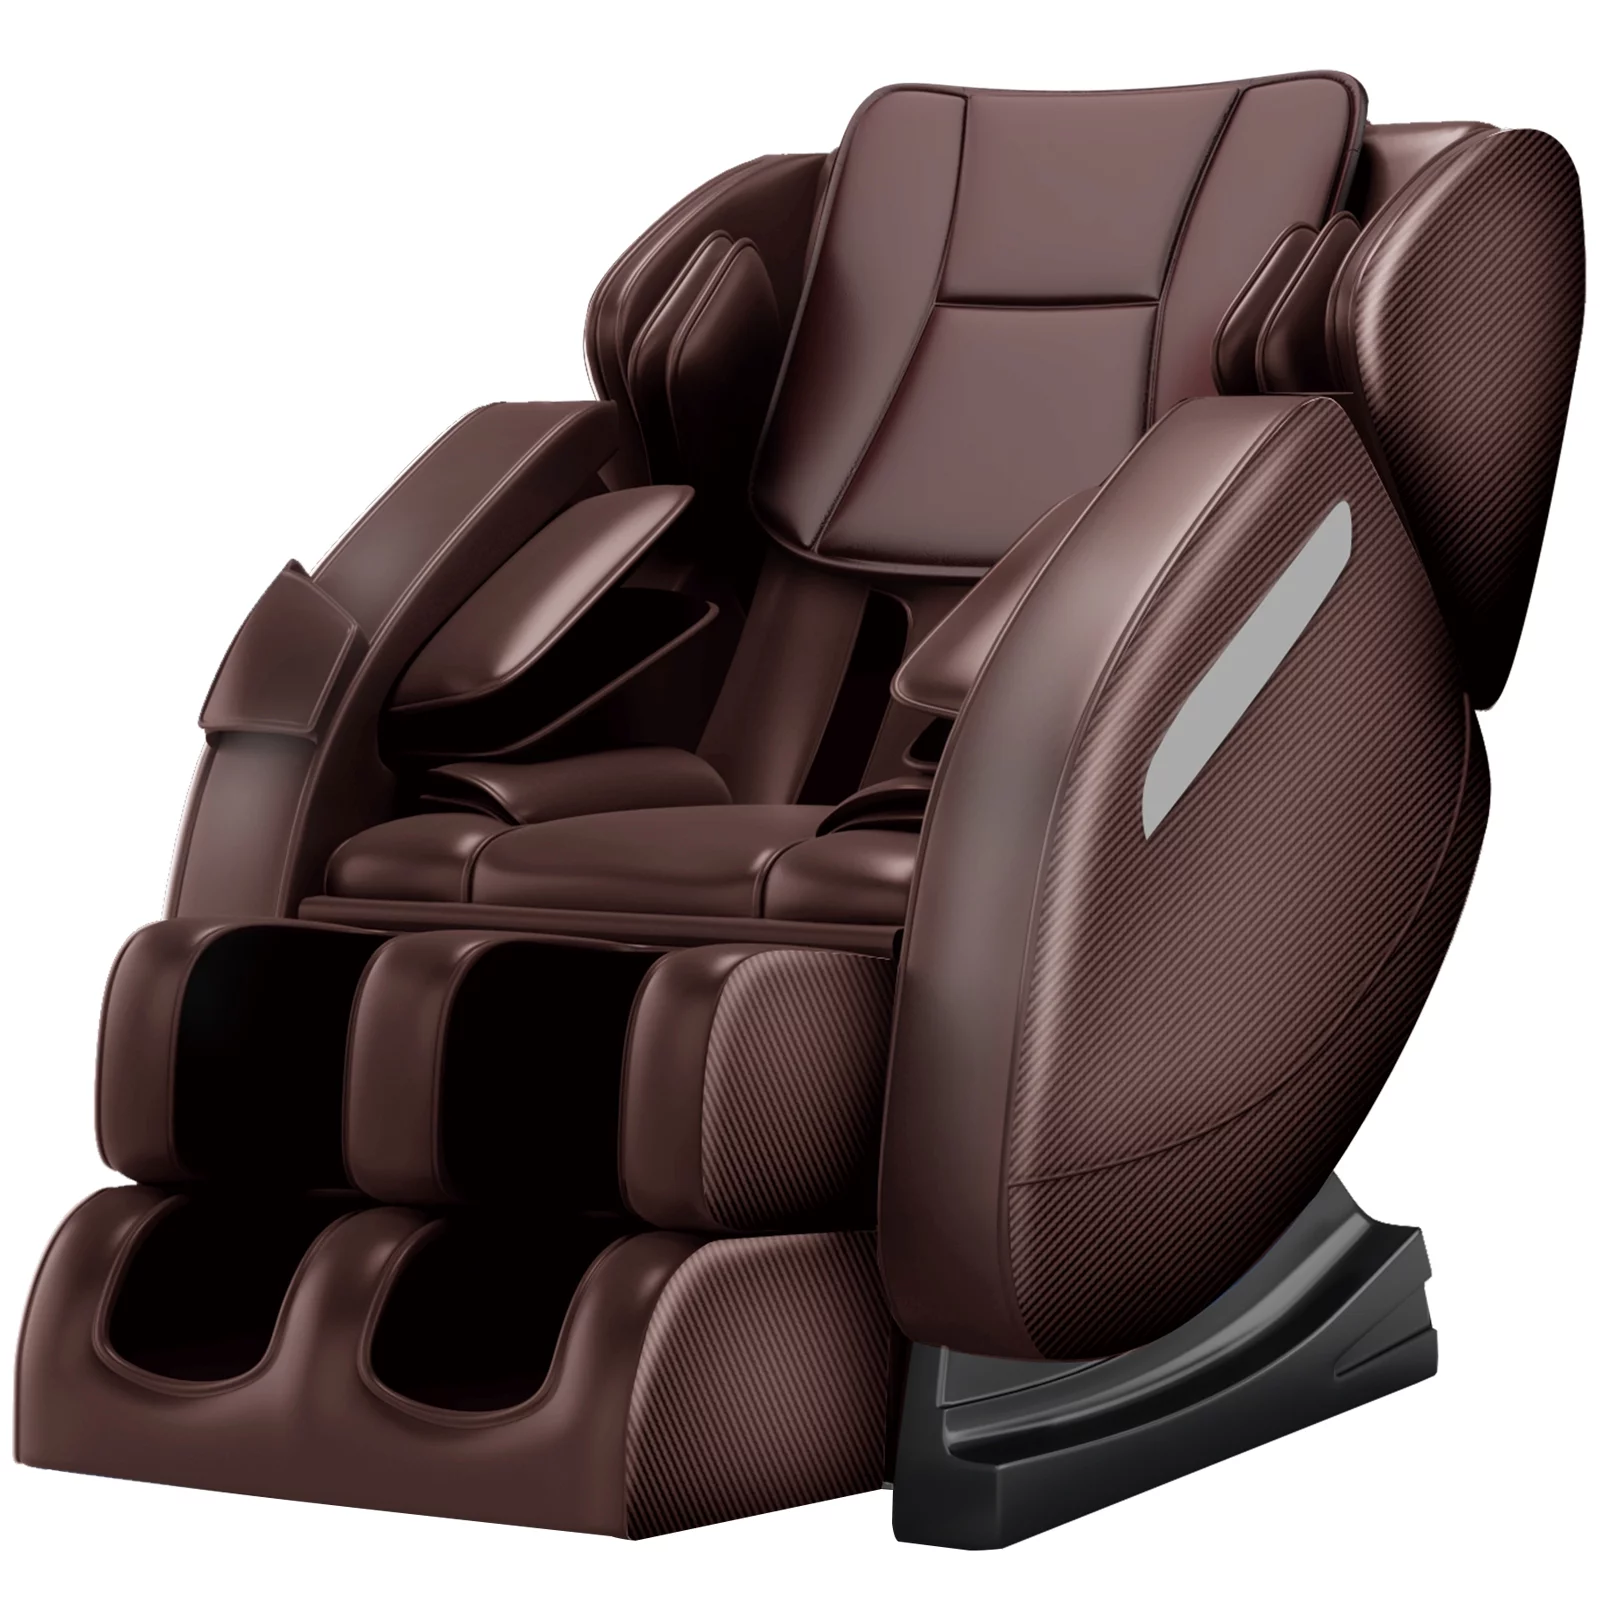 Real Relax Massage Chair, Full Body Recliner with Zero Gravity Chair, Air Pressure, Bluetooth, Heat and Foot Roller Included, Brown